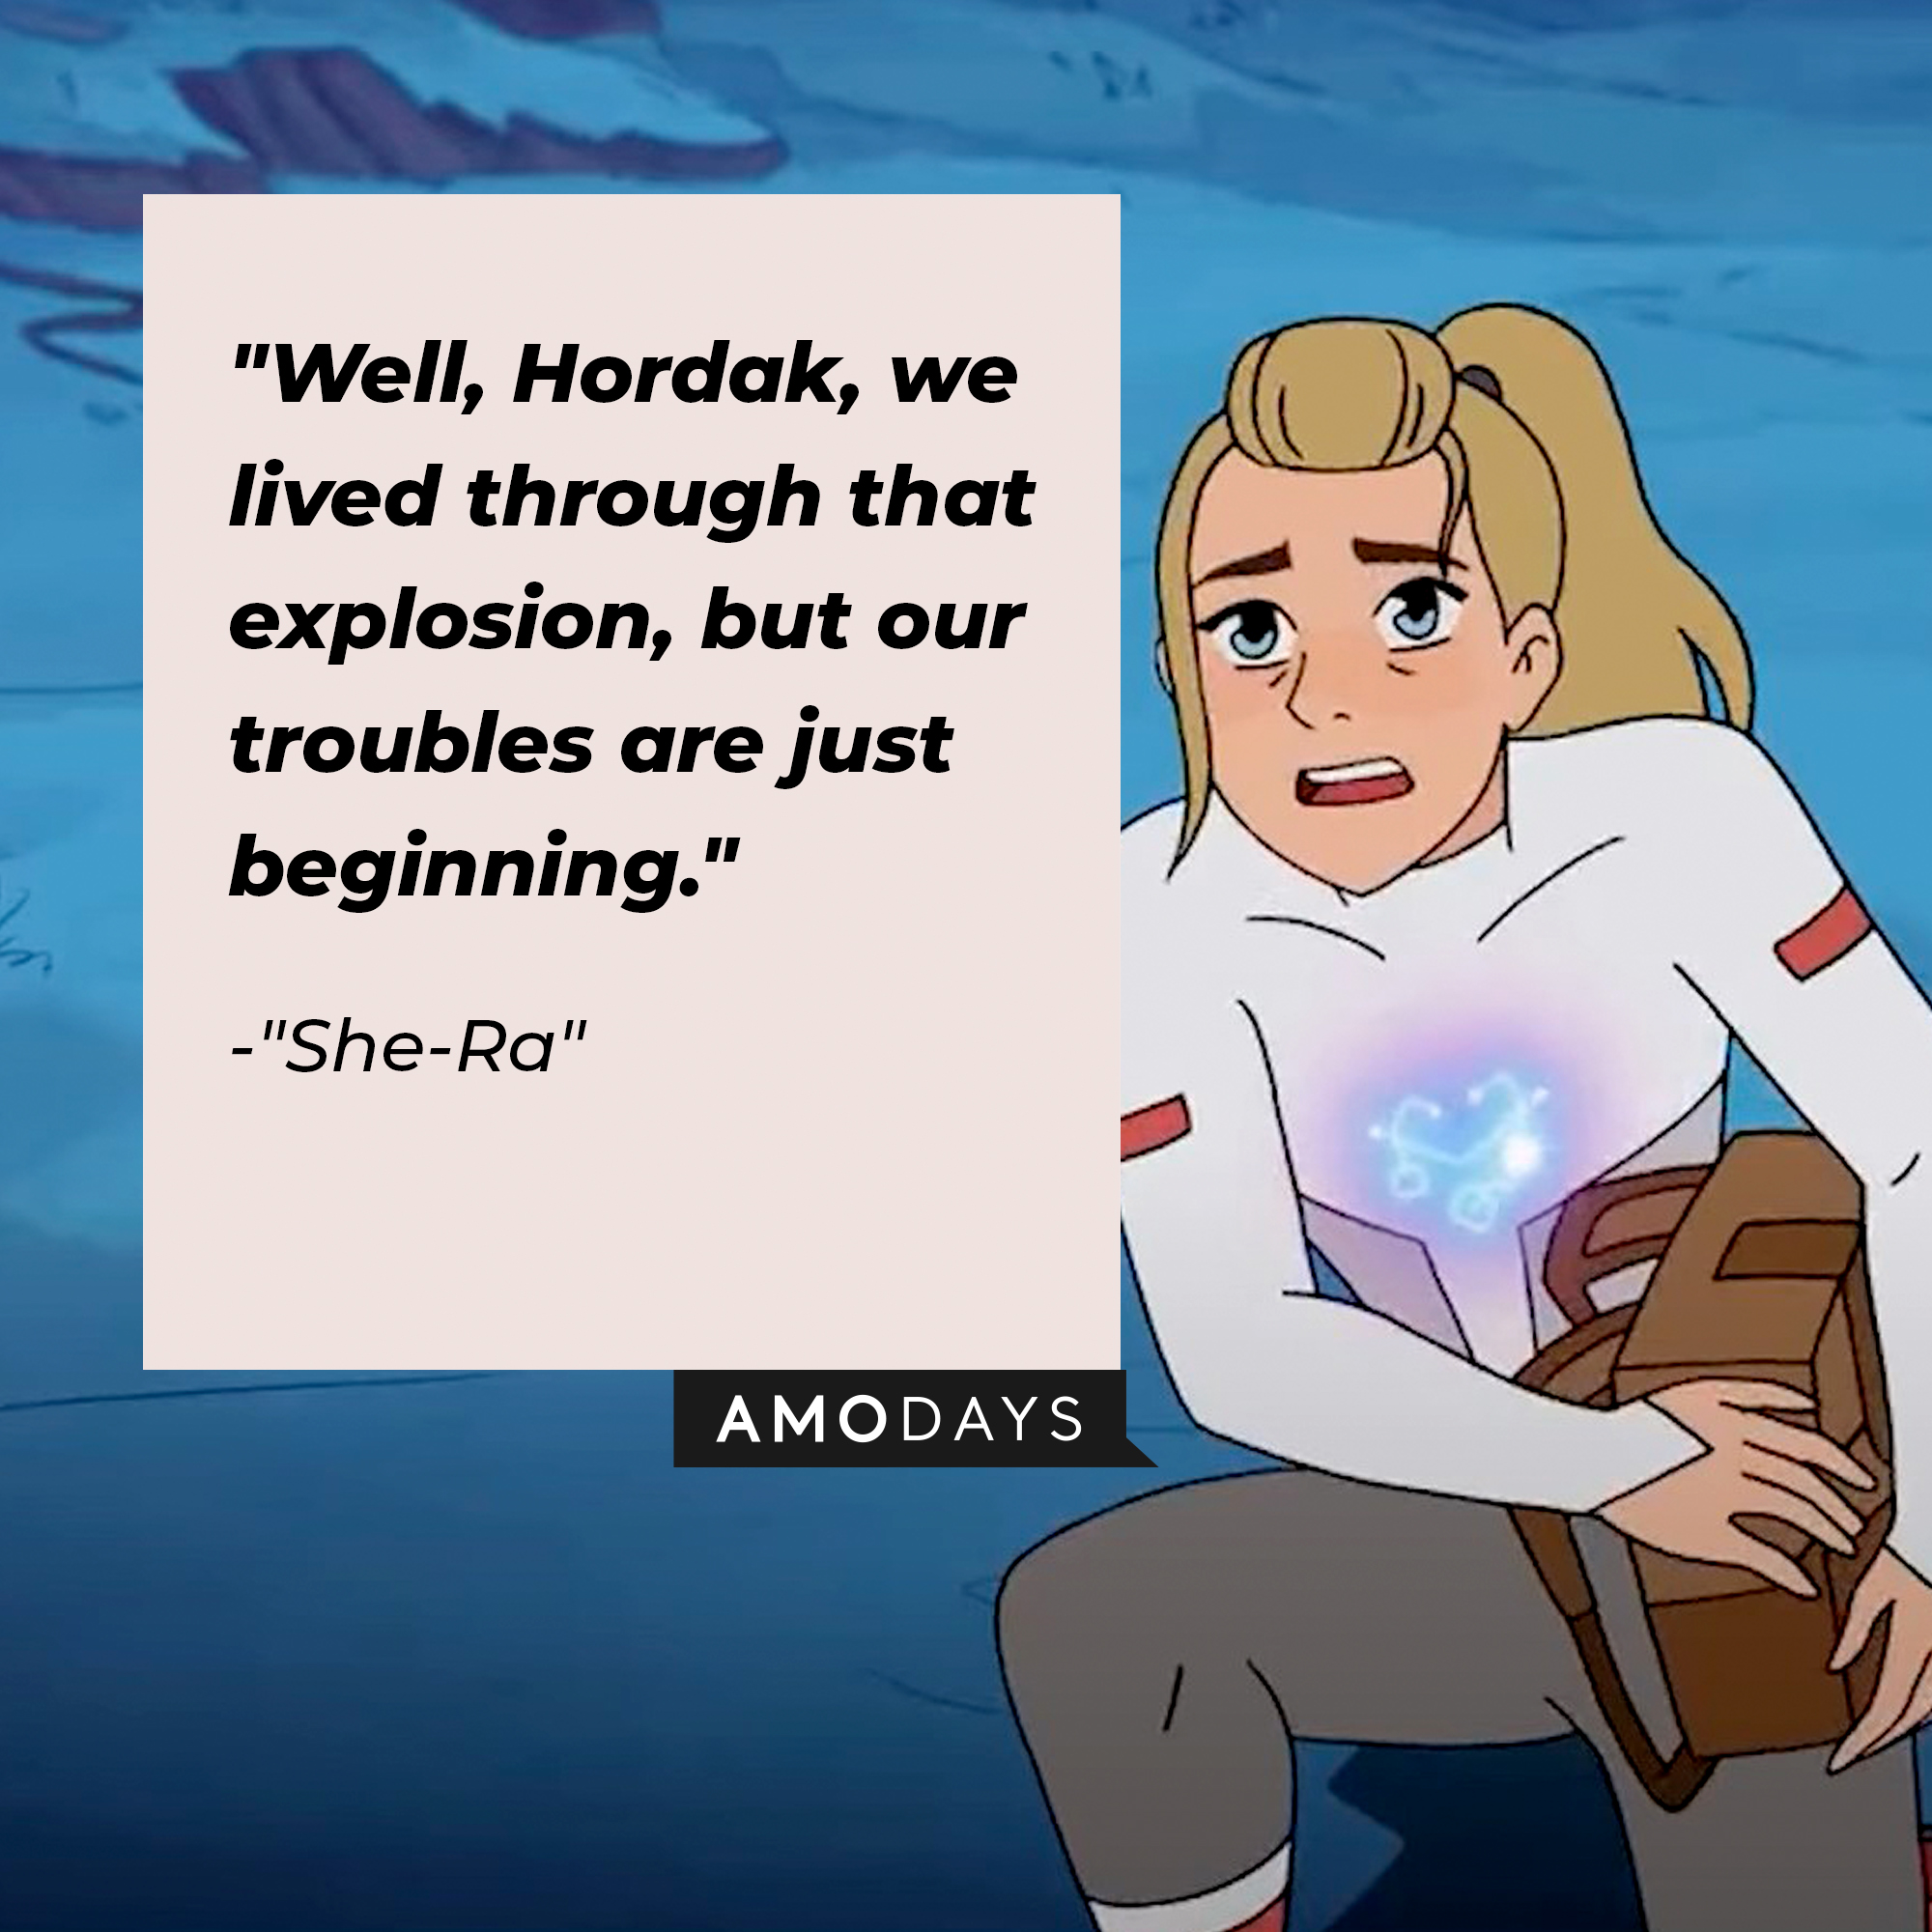 "She-Ra's" quote: "Well, Hordak, we lived through that explosion, but our troubles are just beginning." | Source: Facebook.com/DreamWorksSheRa